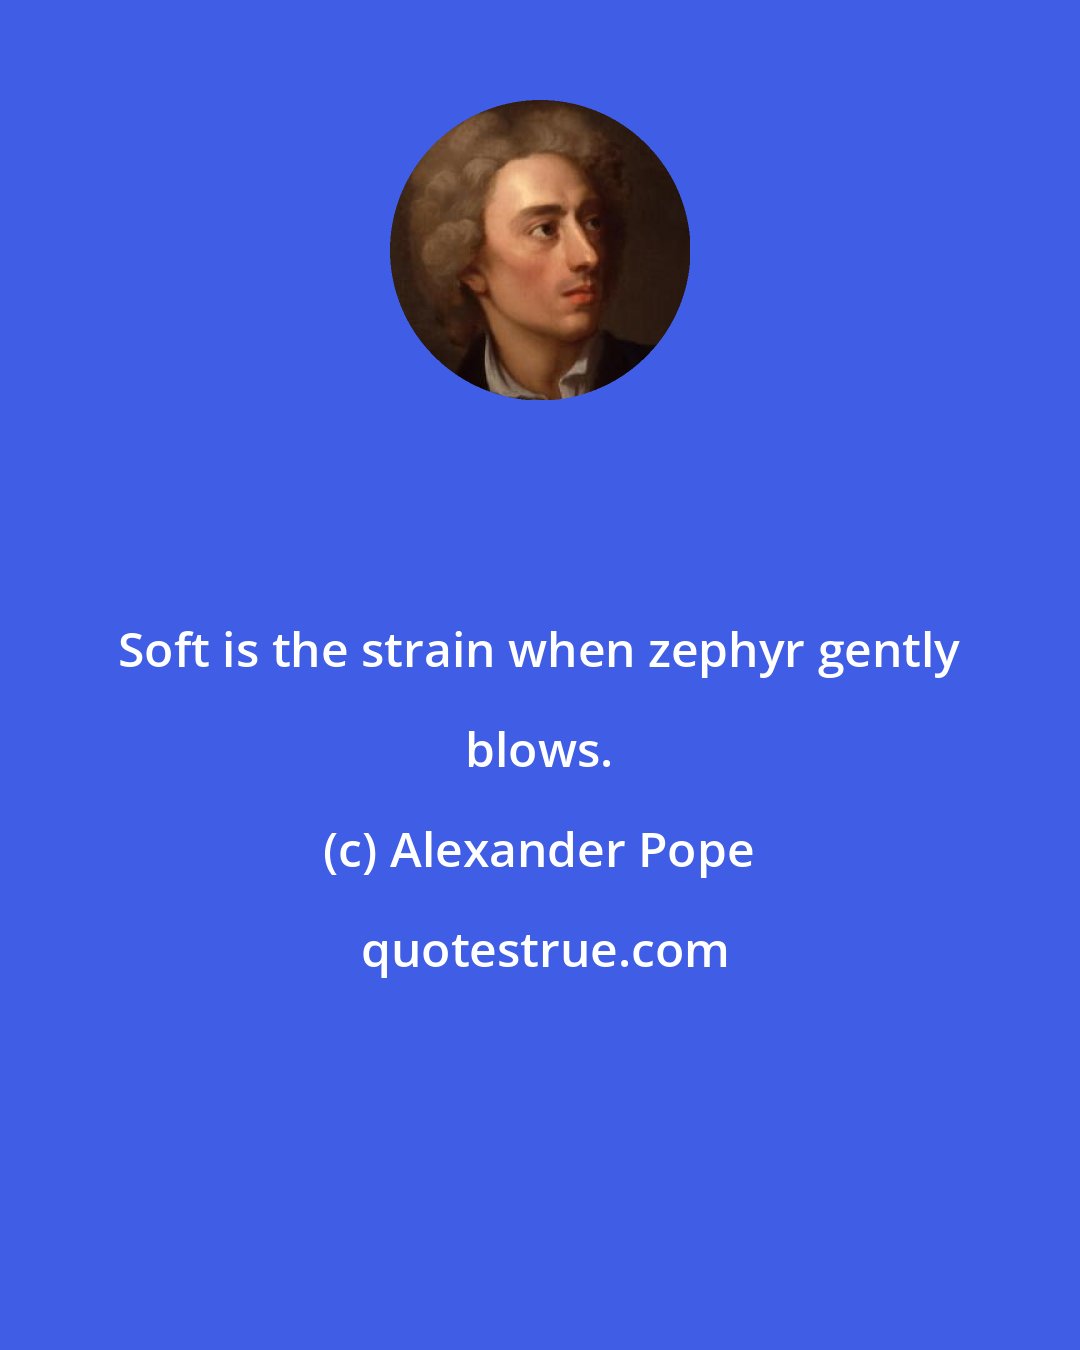 Alexander Pope: Soft is the strain when zephyr gently blows.